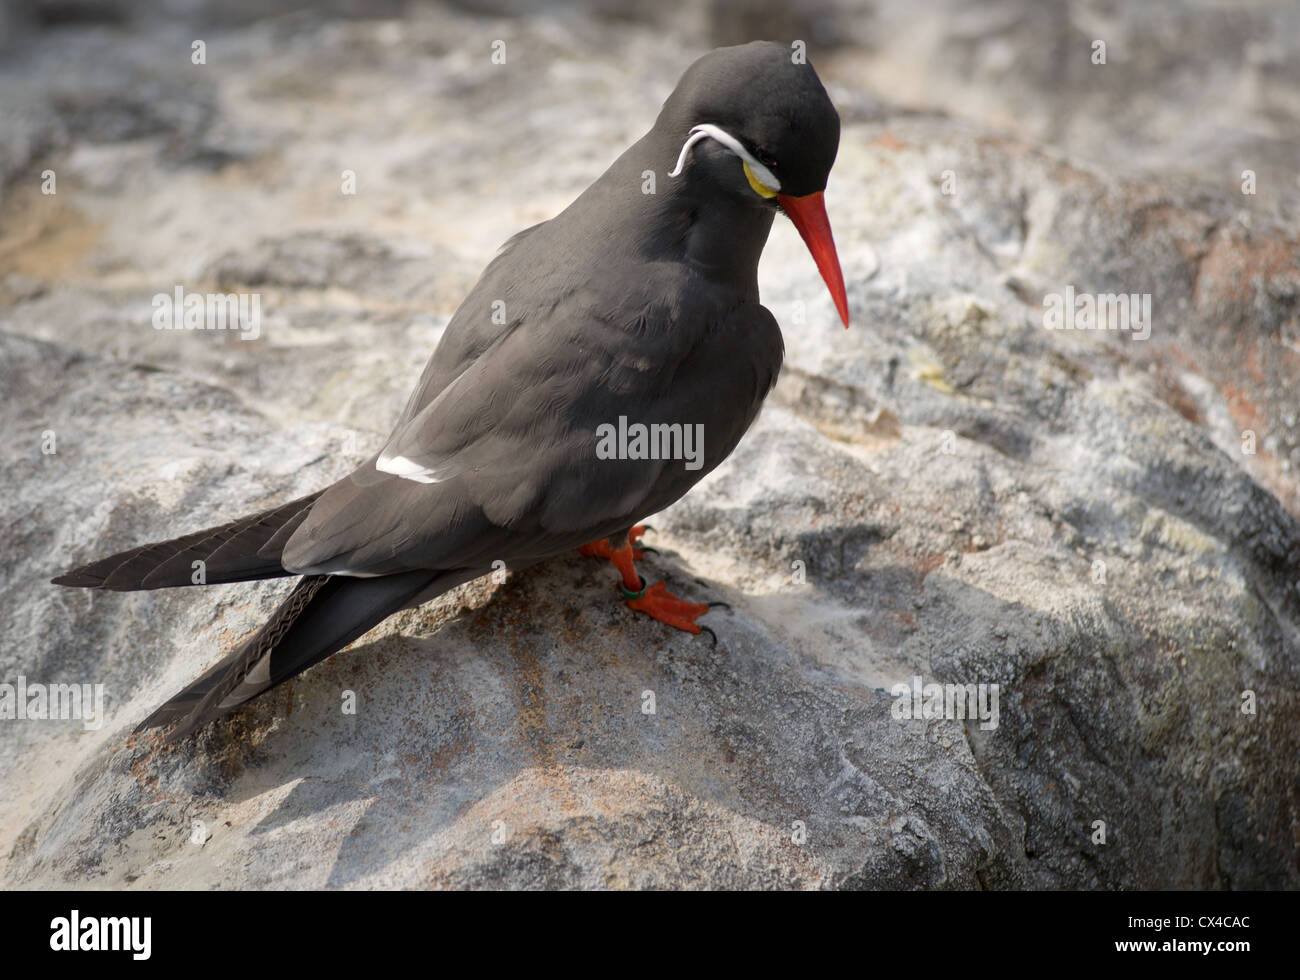 Small black bird with white spot over its eyes and white spot on its wings and bright orange beak and feet. Stock Photo